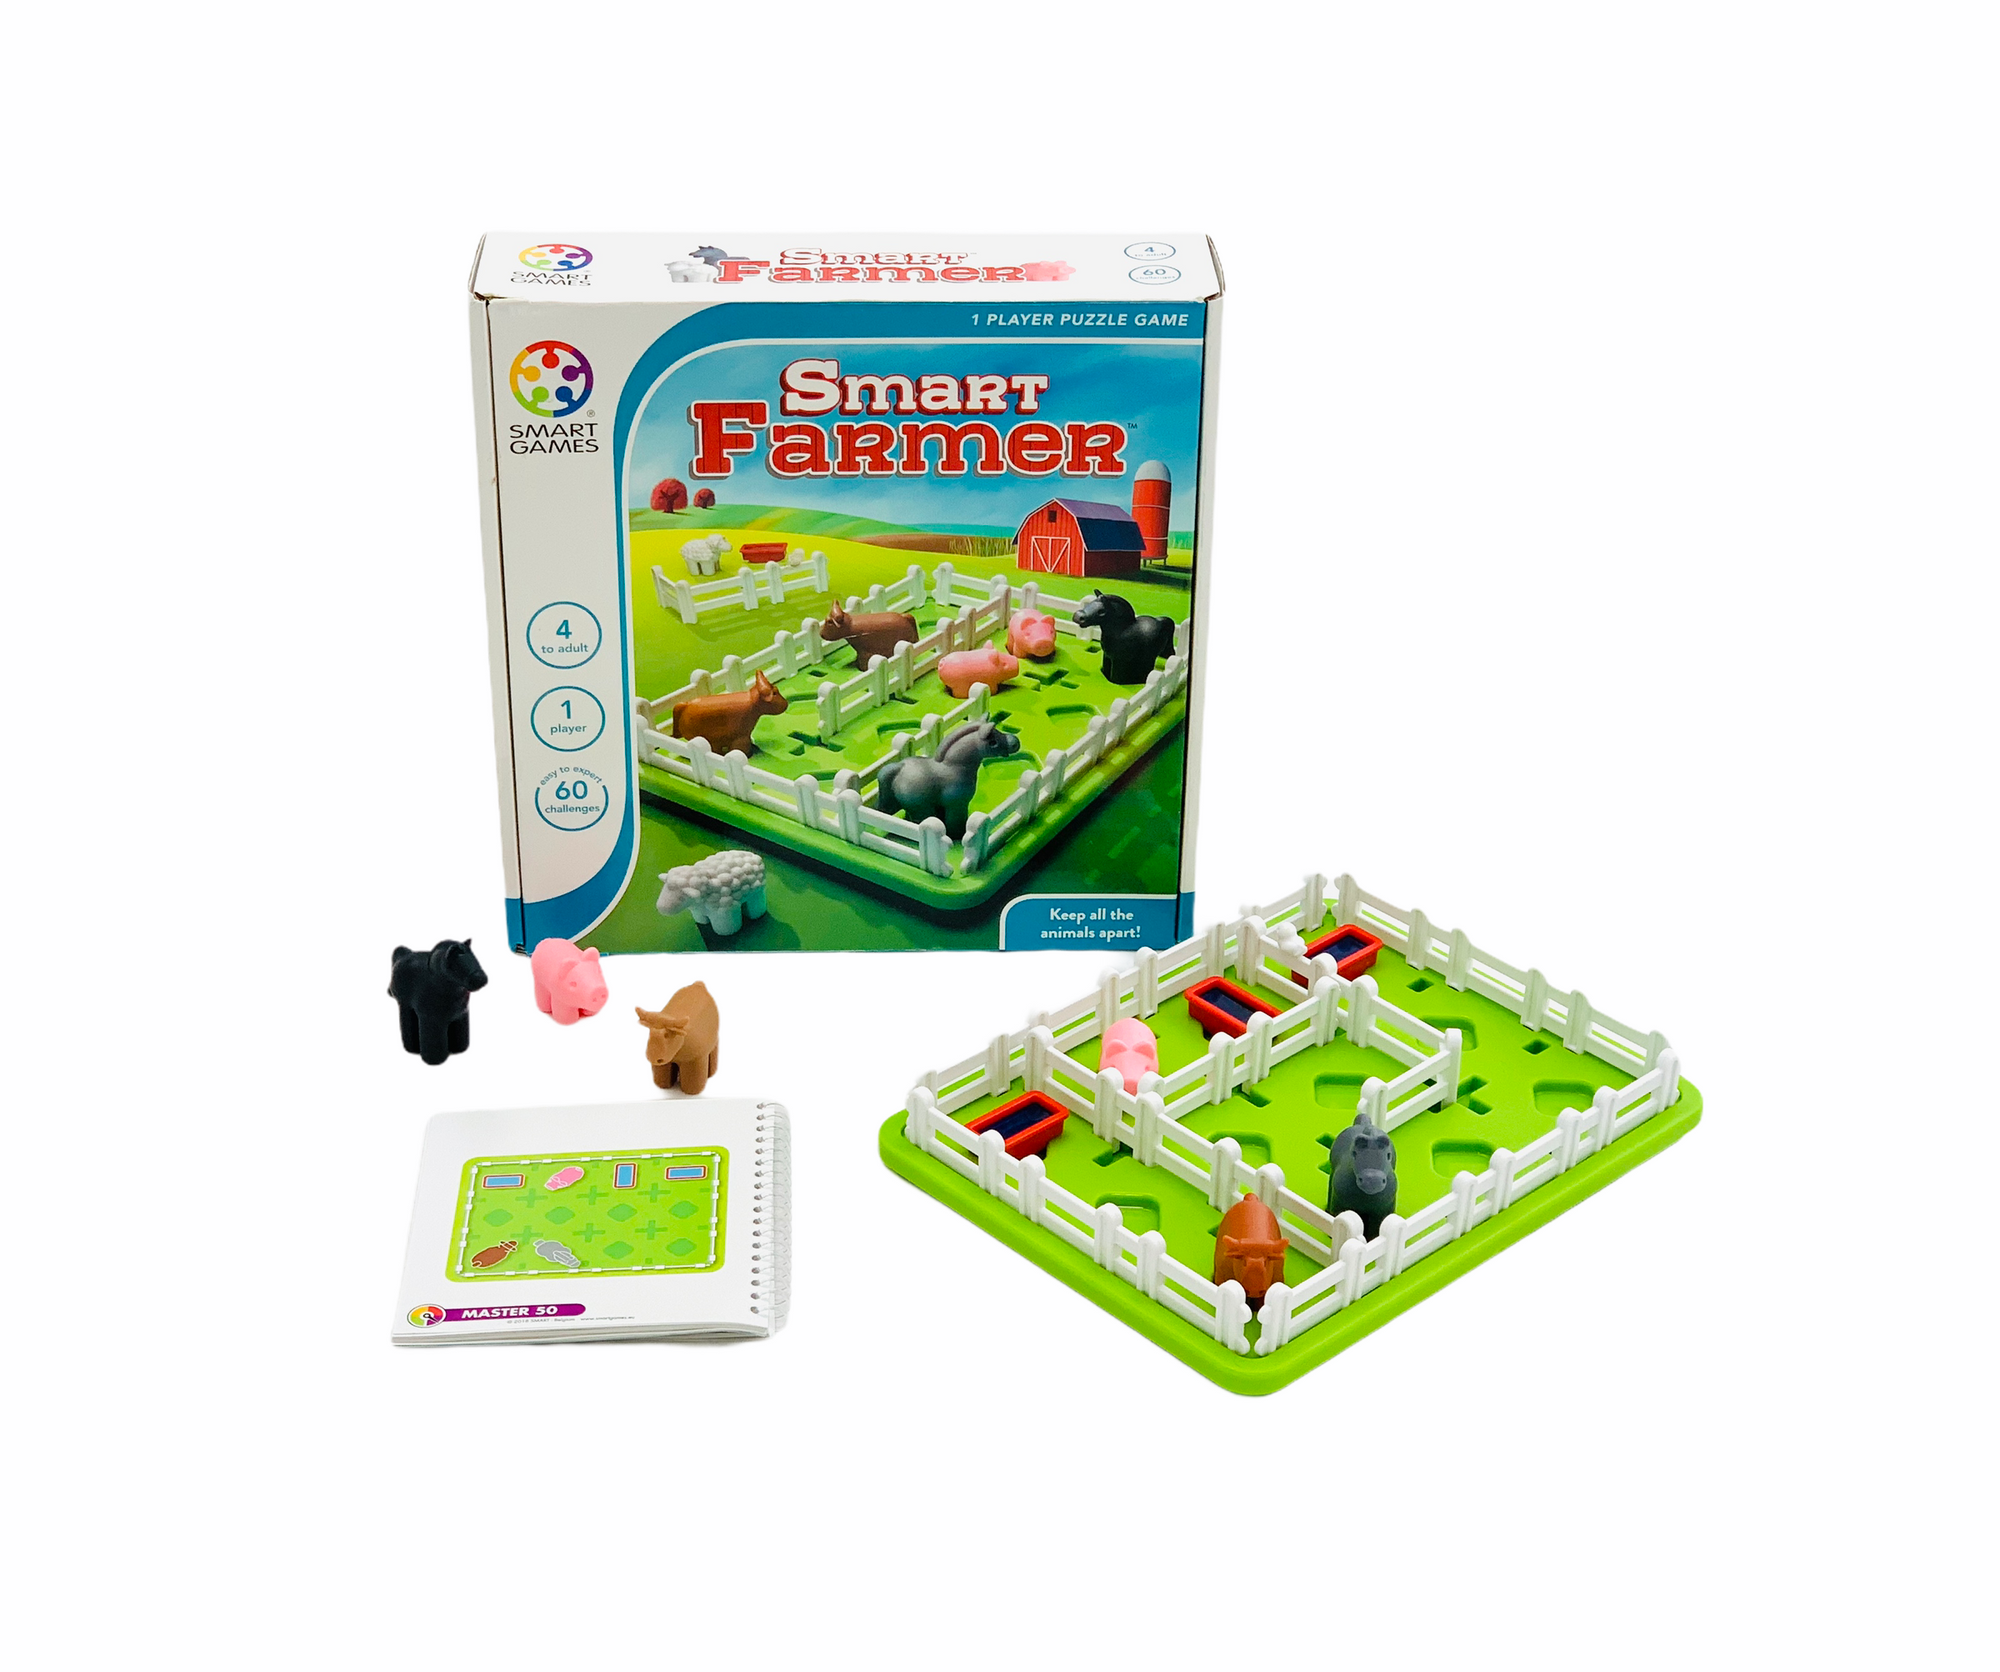 Smart Games Smart Farmer Logic game on display with pieces in front of box